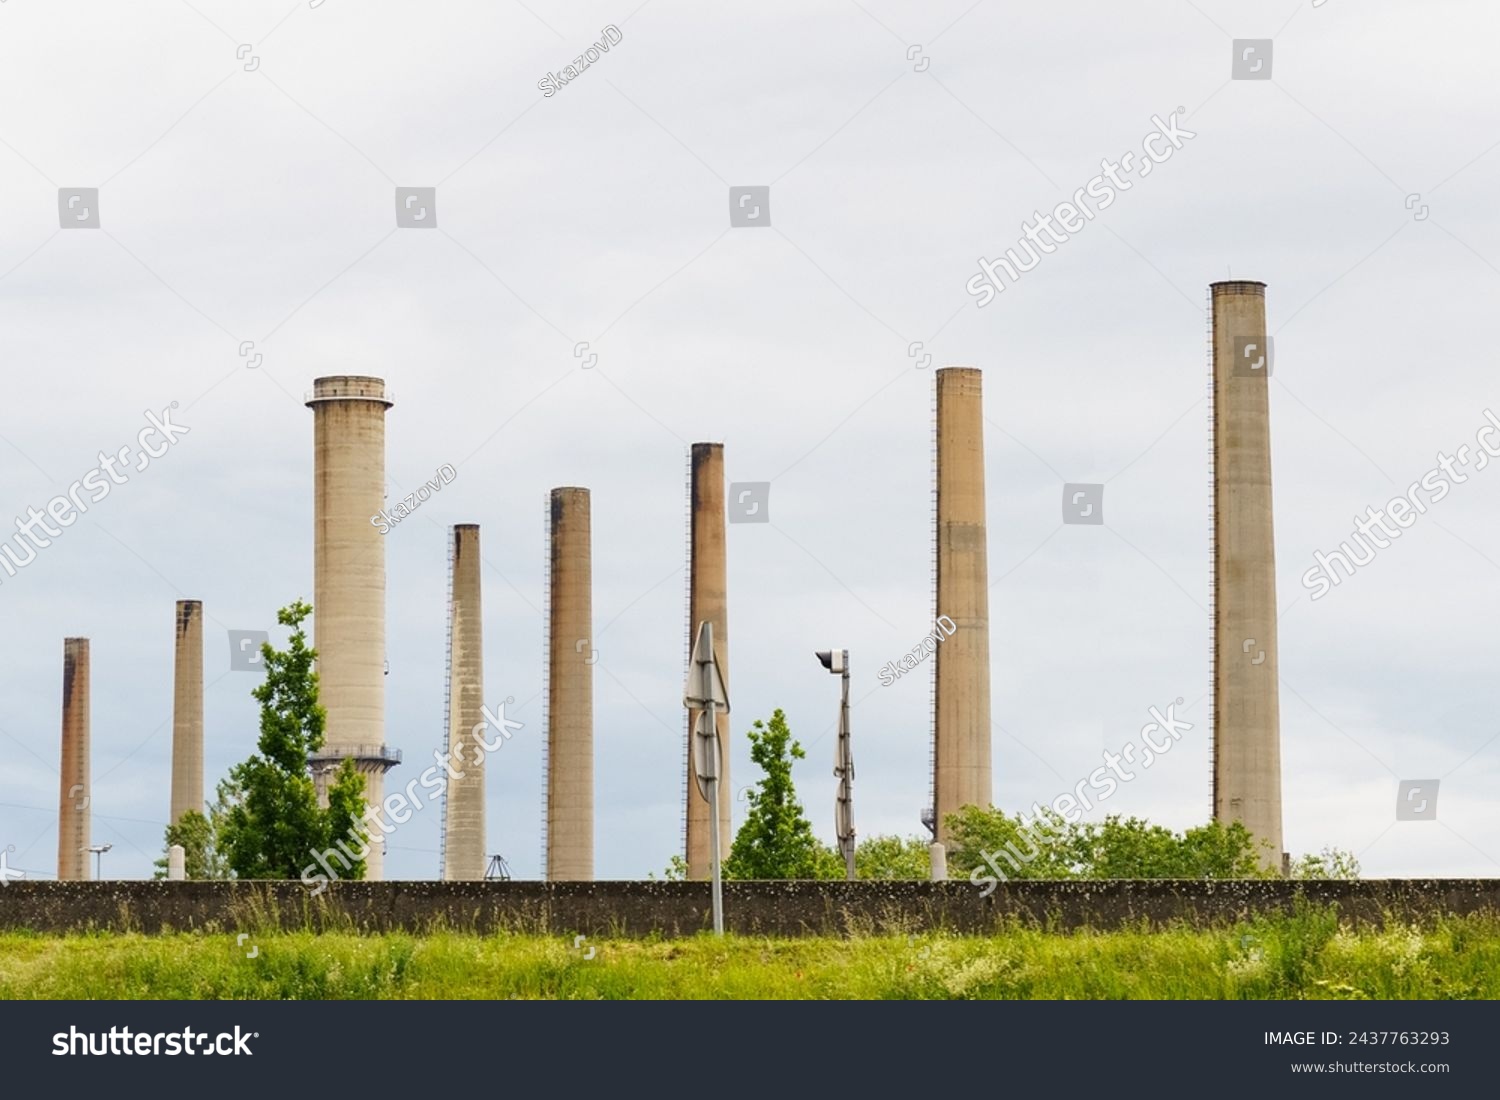 A row of tall, disused industrial smokestacks stands against a cloudy sky, remnants of a bygone manufacturing era, showcased here in a quiet state of neglect. #2437763293